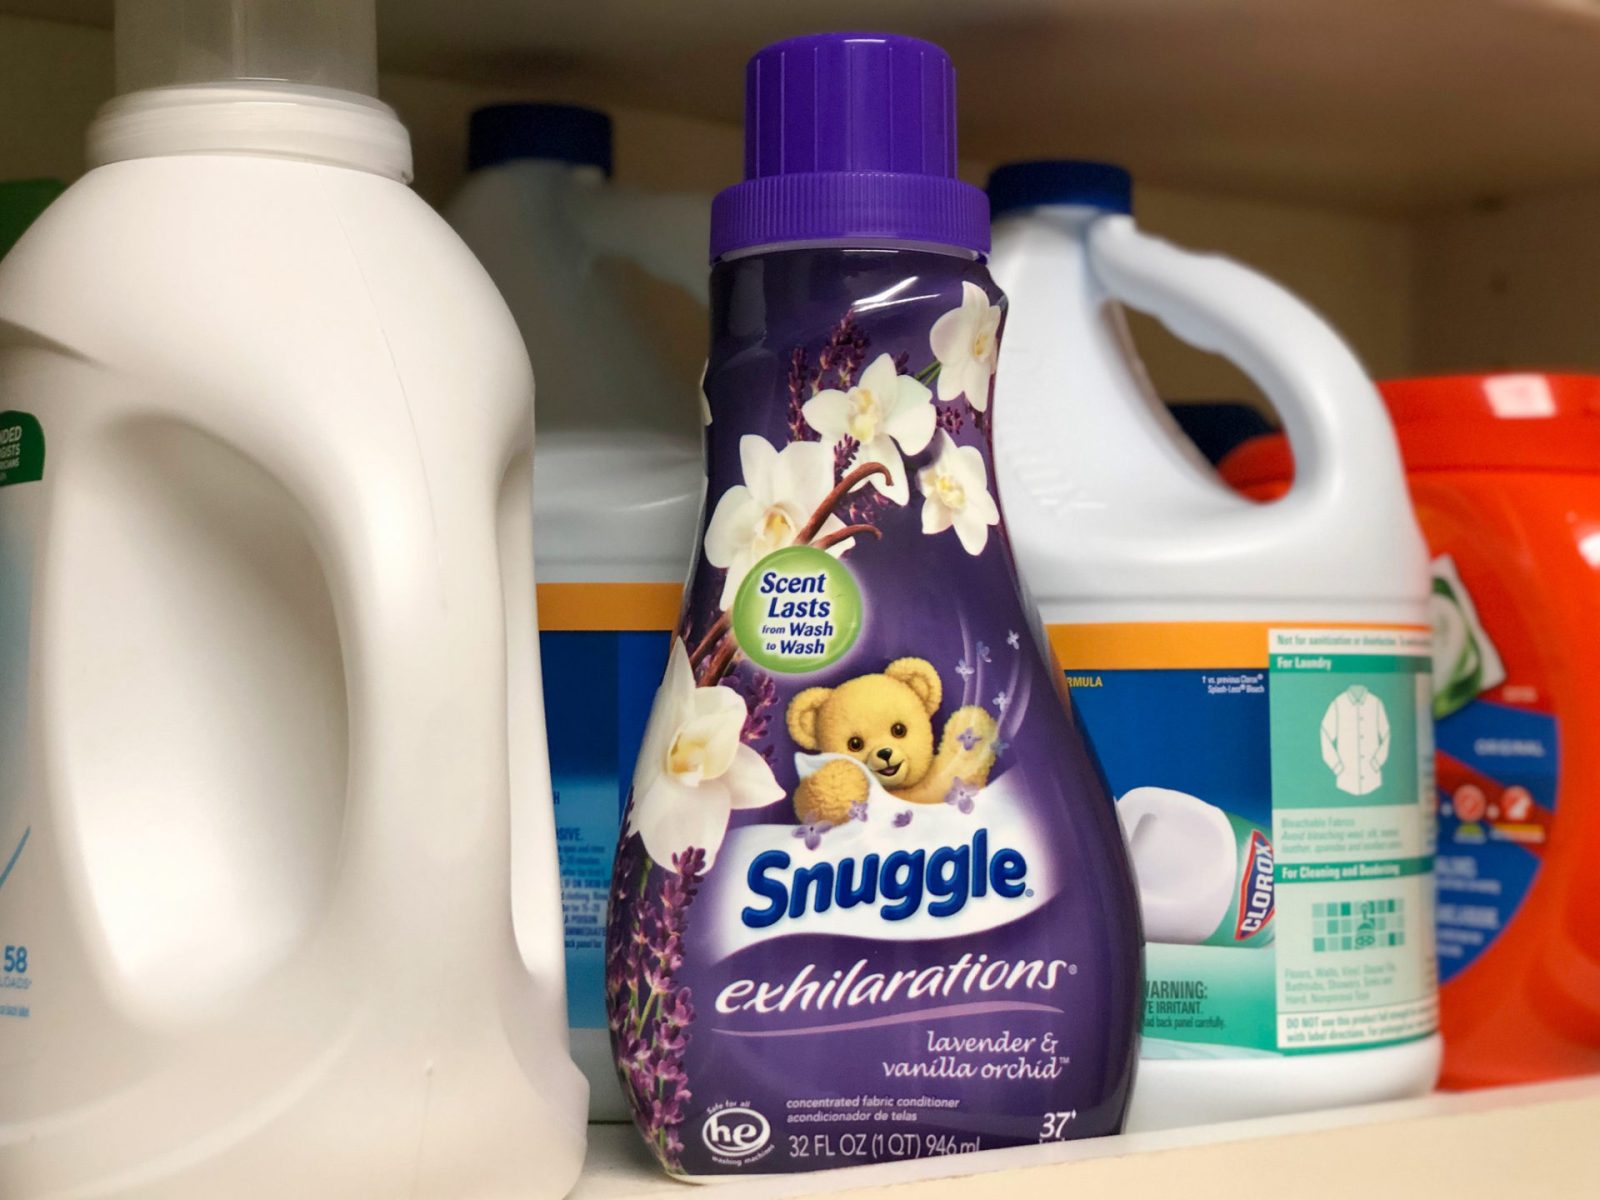 Snuggle Fabric Softener or Dryer Sheets As Low As $1.99 At Kroger